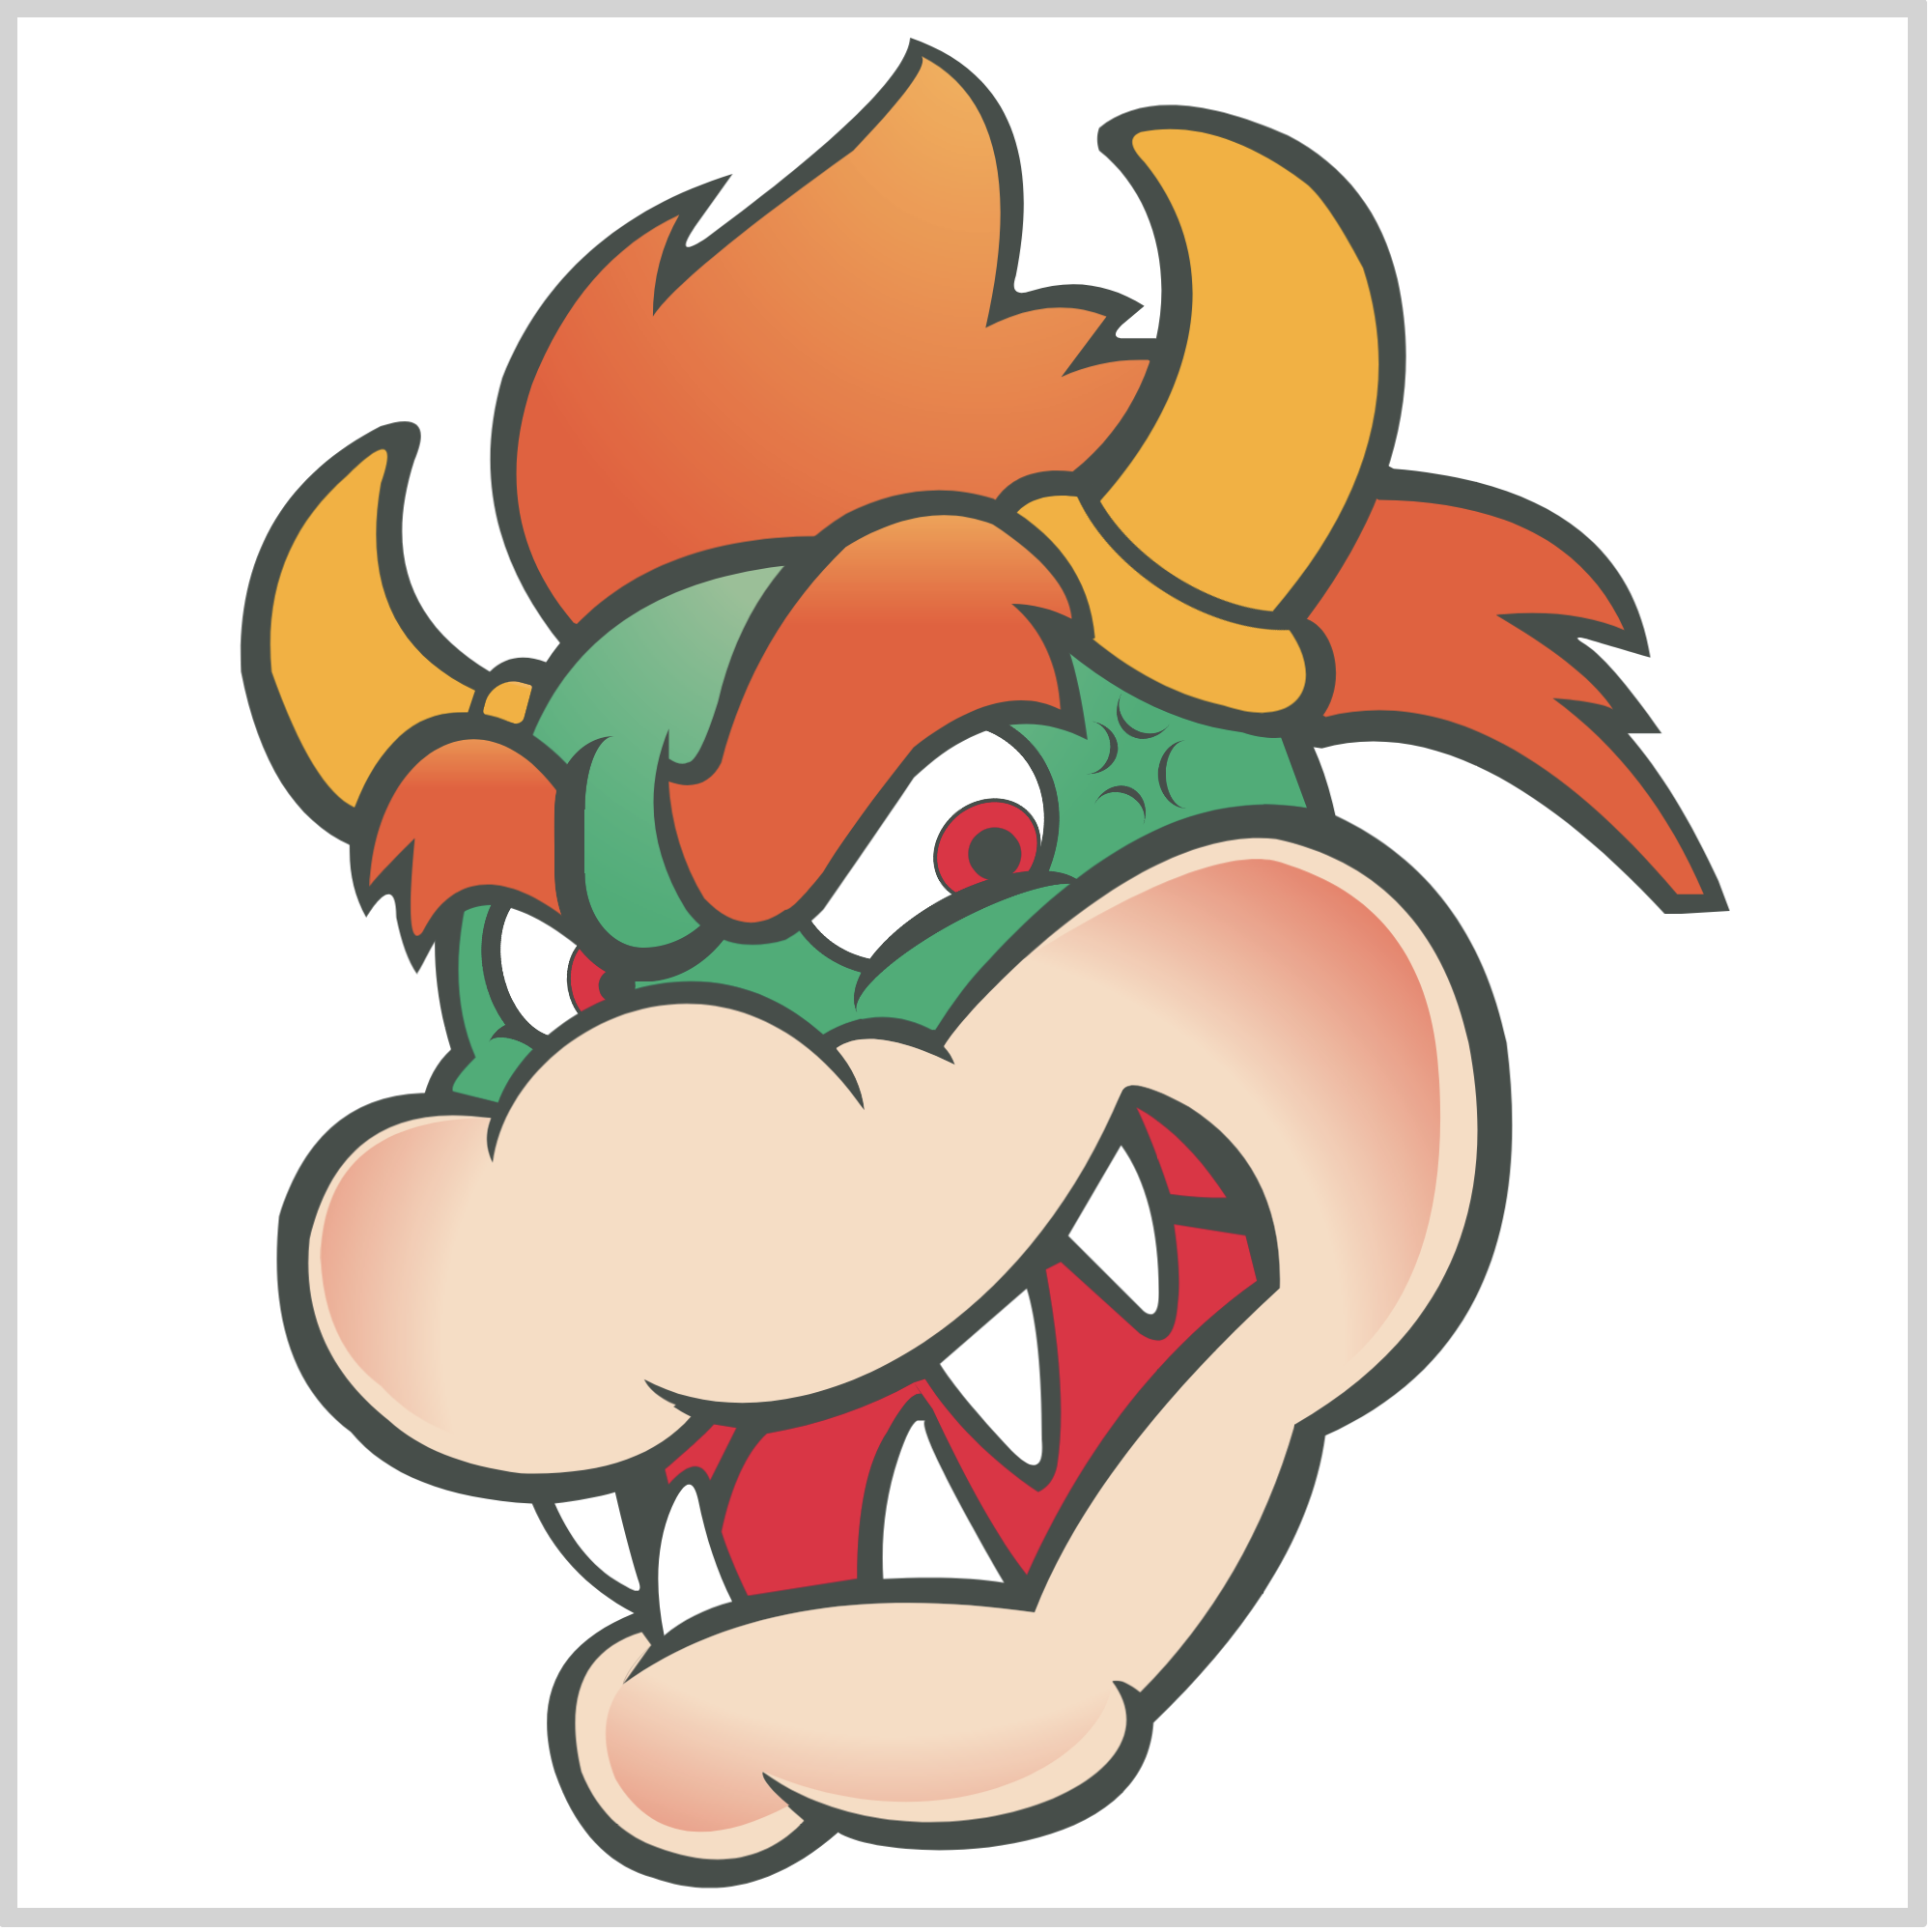 CSS Art – How to Make a Game Character – Bowser (King Koopa)